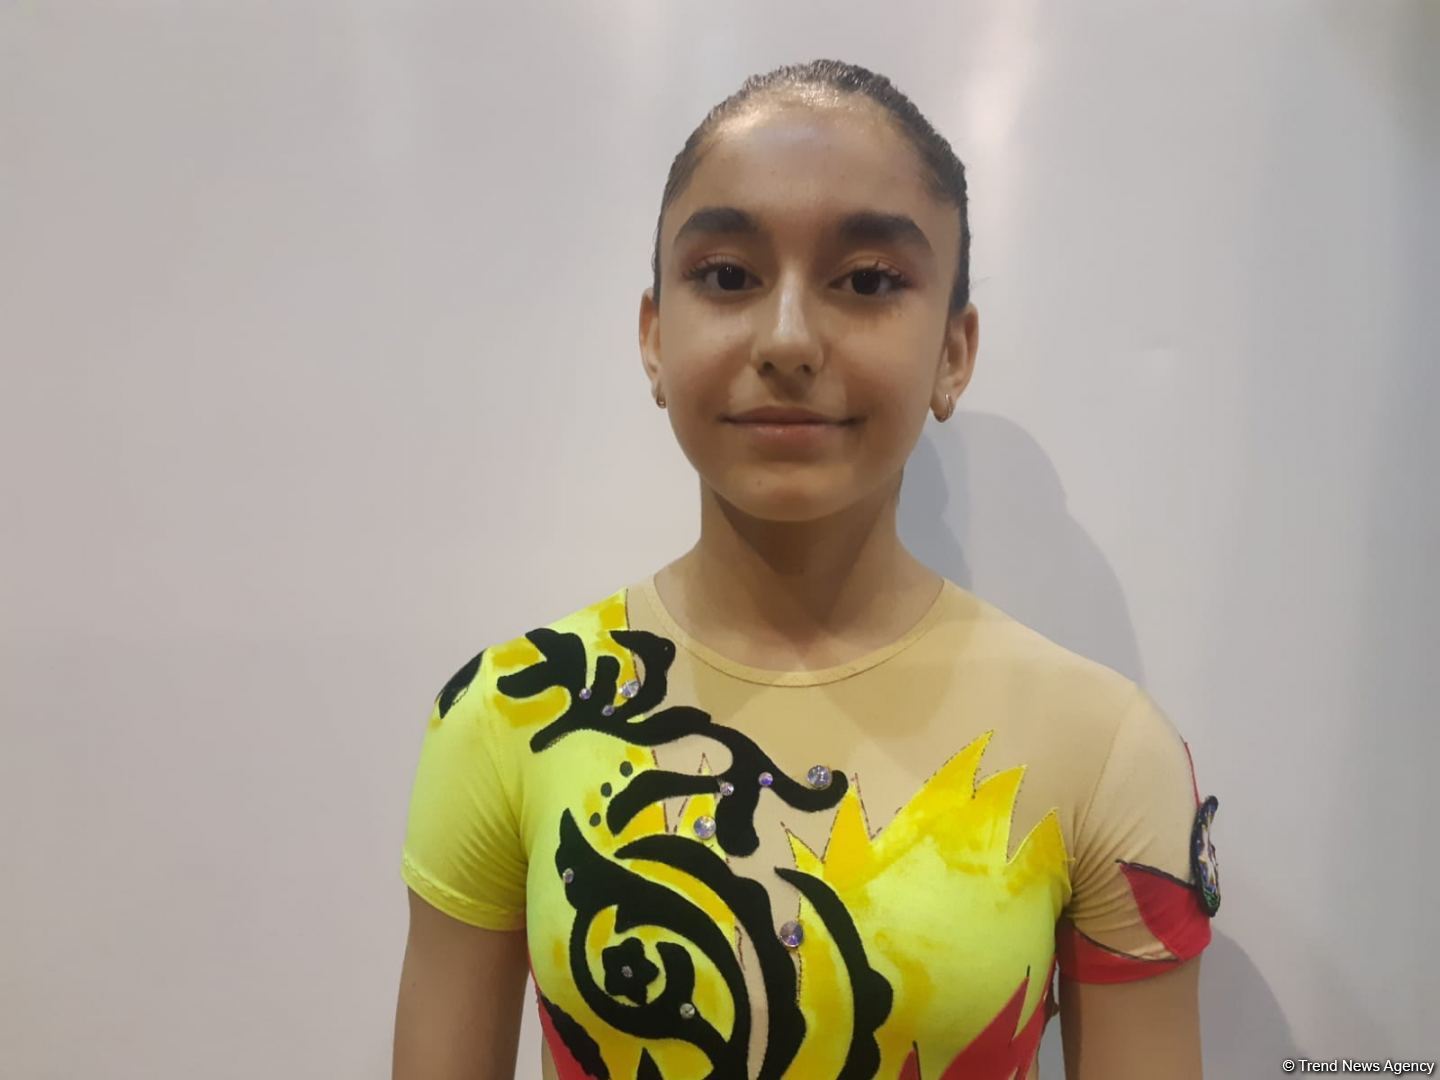 Young Azerbaijani athlete dreams to perform for national team in aerobic gymnastics